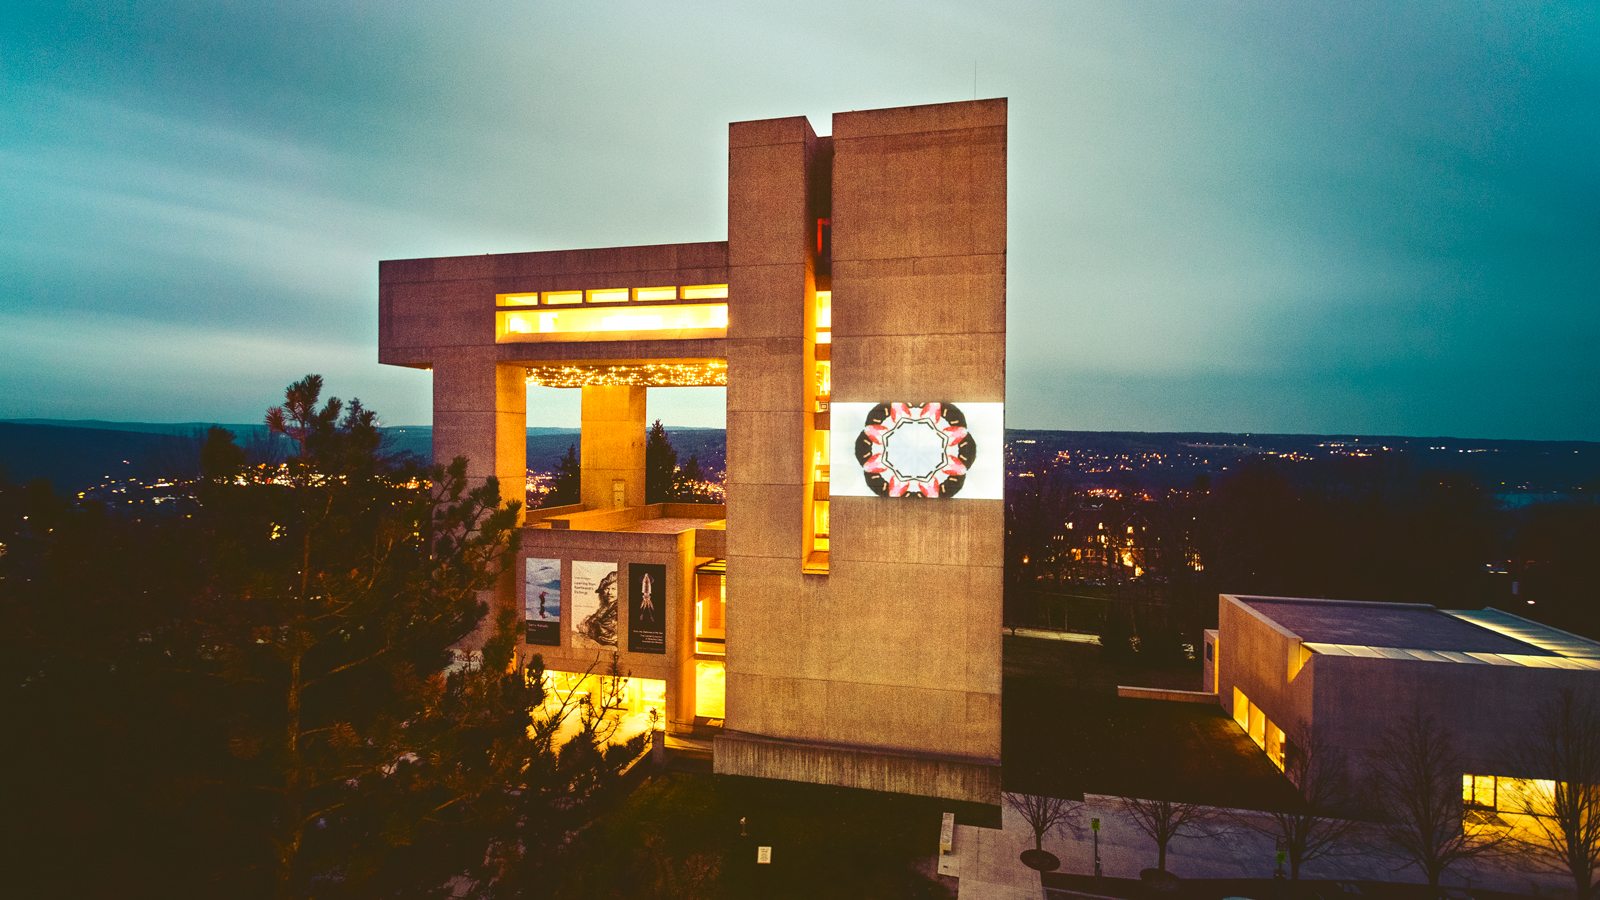 A shot of the Johnson Museum at Cornell University at night.